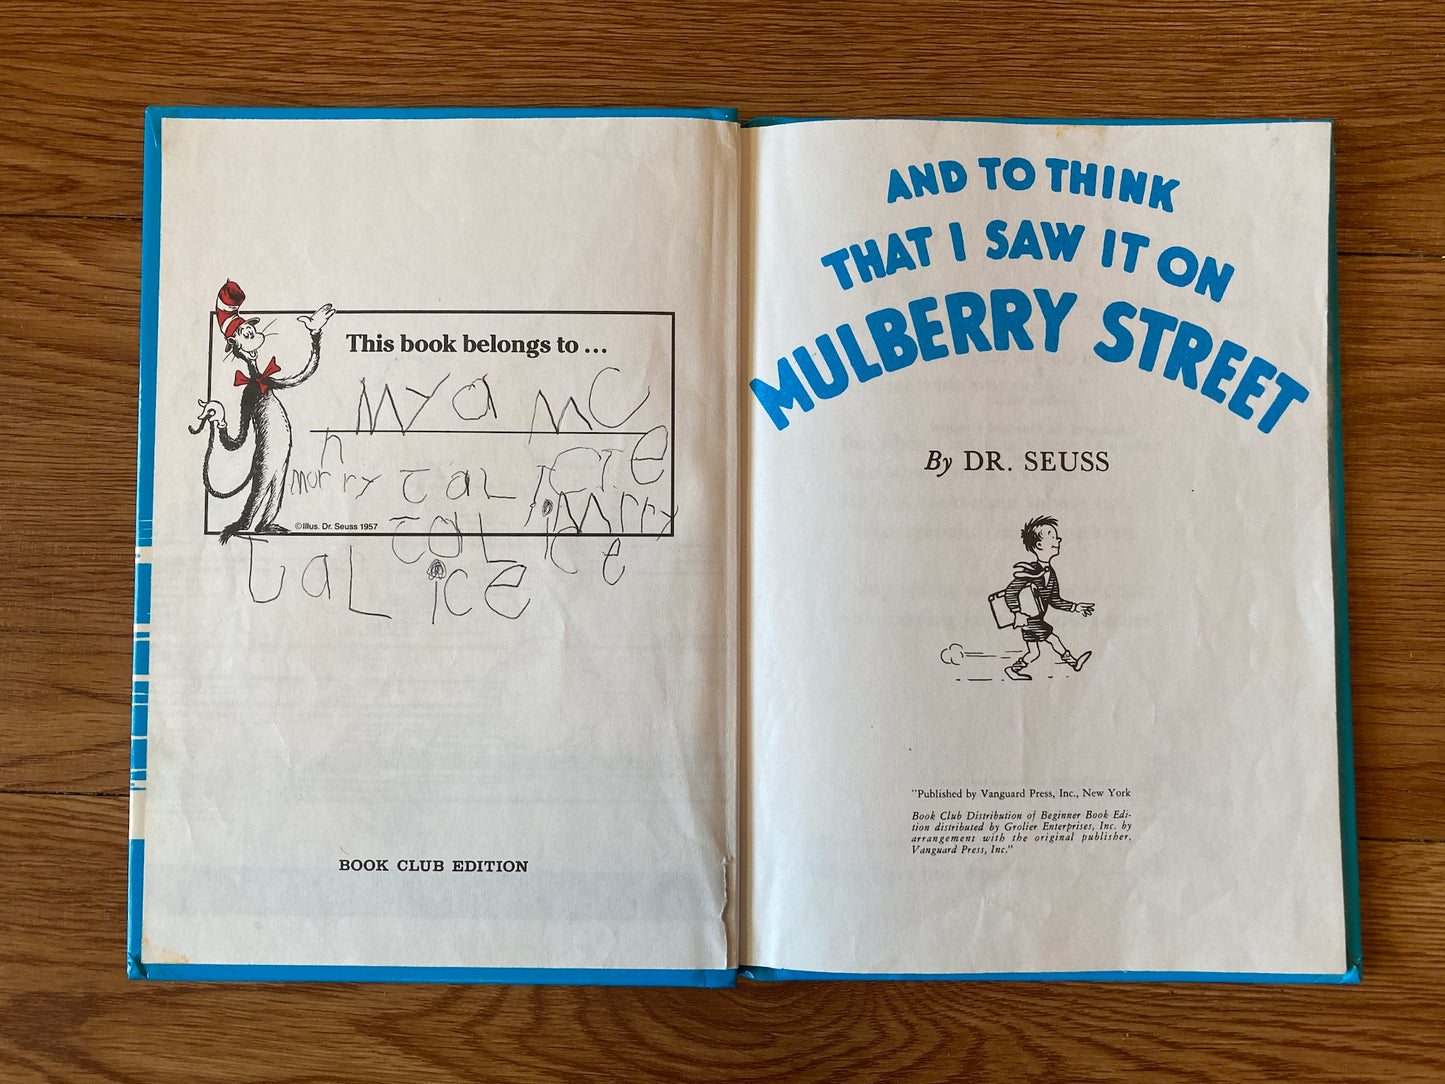 And to Think That I Saw it on Mulberry Street, Dr. Seuss